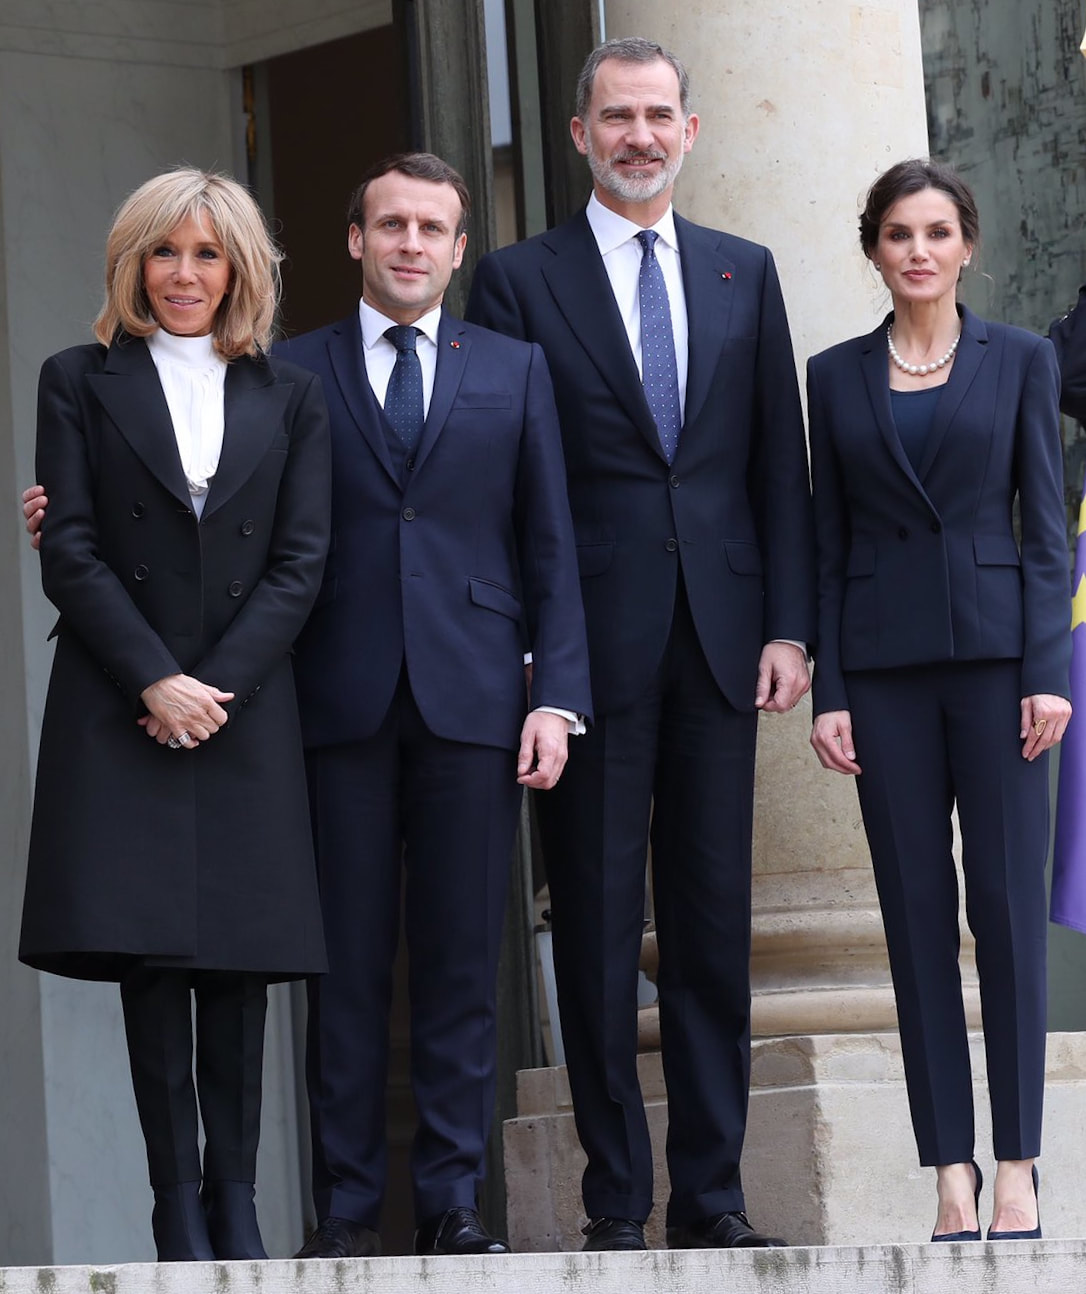 King Felipe VI and Queen Letizia with French president, Emmanuel Macron and First Lady Brigitte Macron at Elysee Palace on 11 March 2020